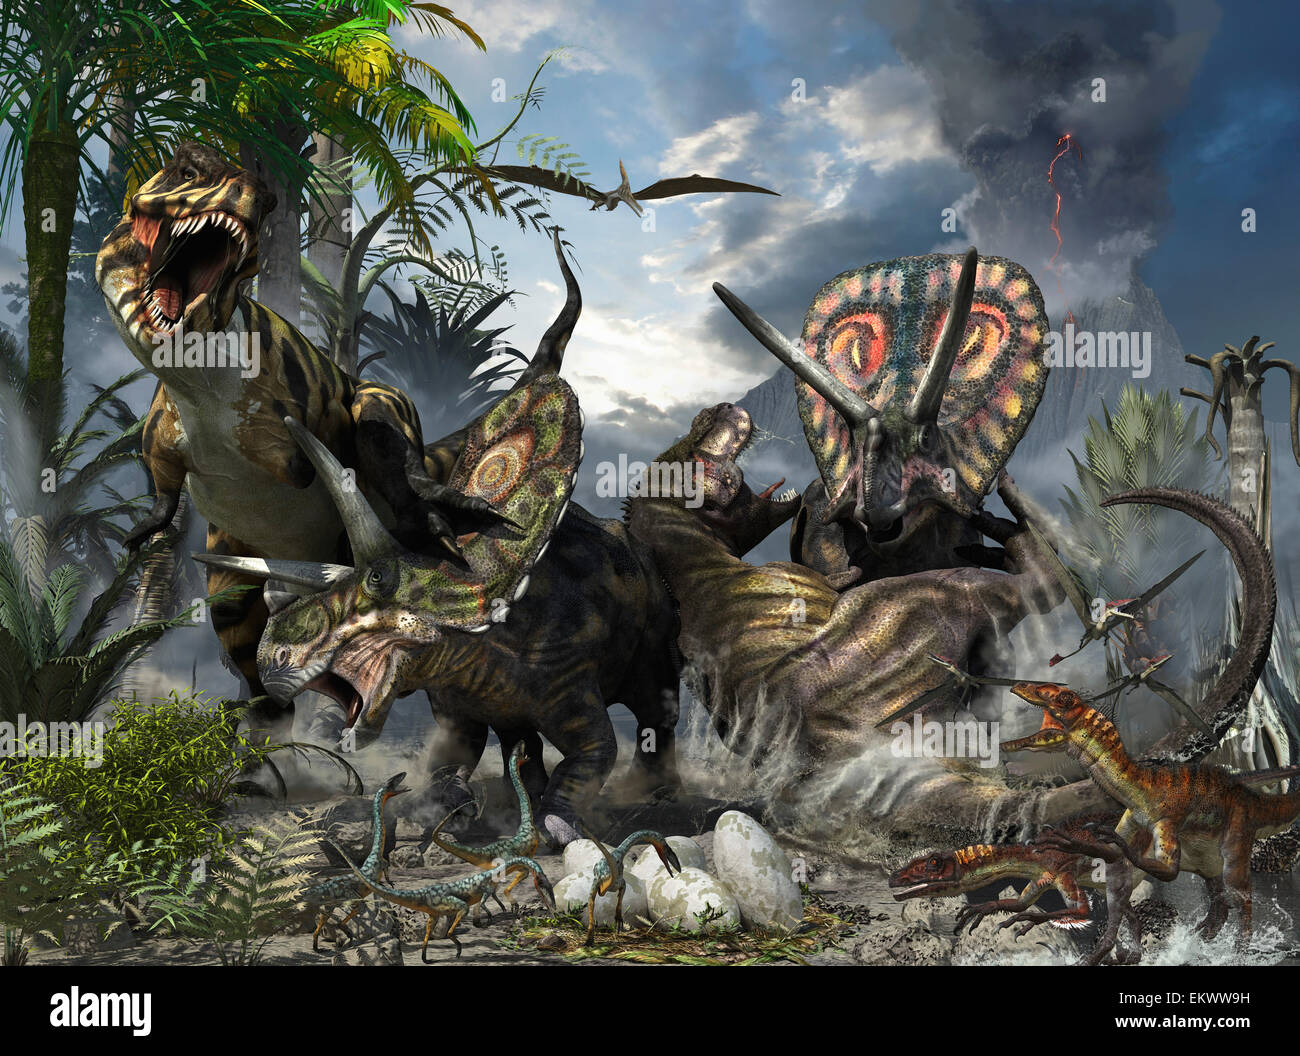 A pair of Tyrannosaurus rex fighting with a family of Torosaurus who are protecting their eggs. Stock Photo